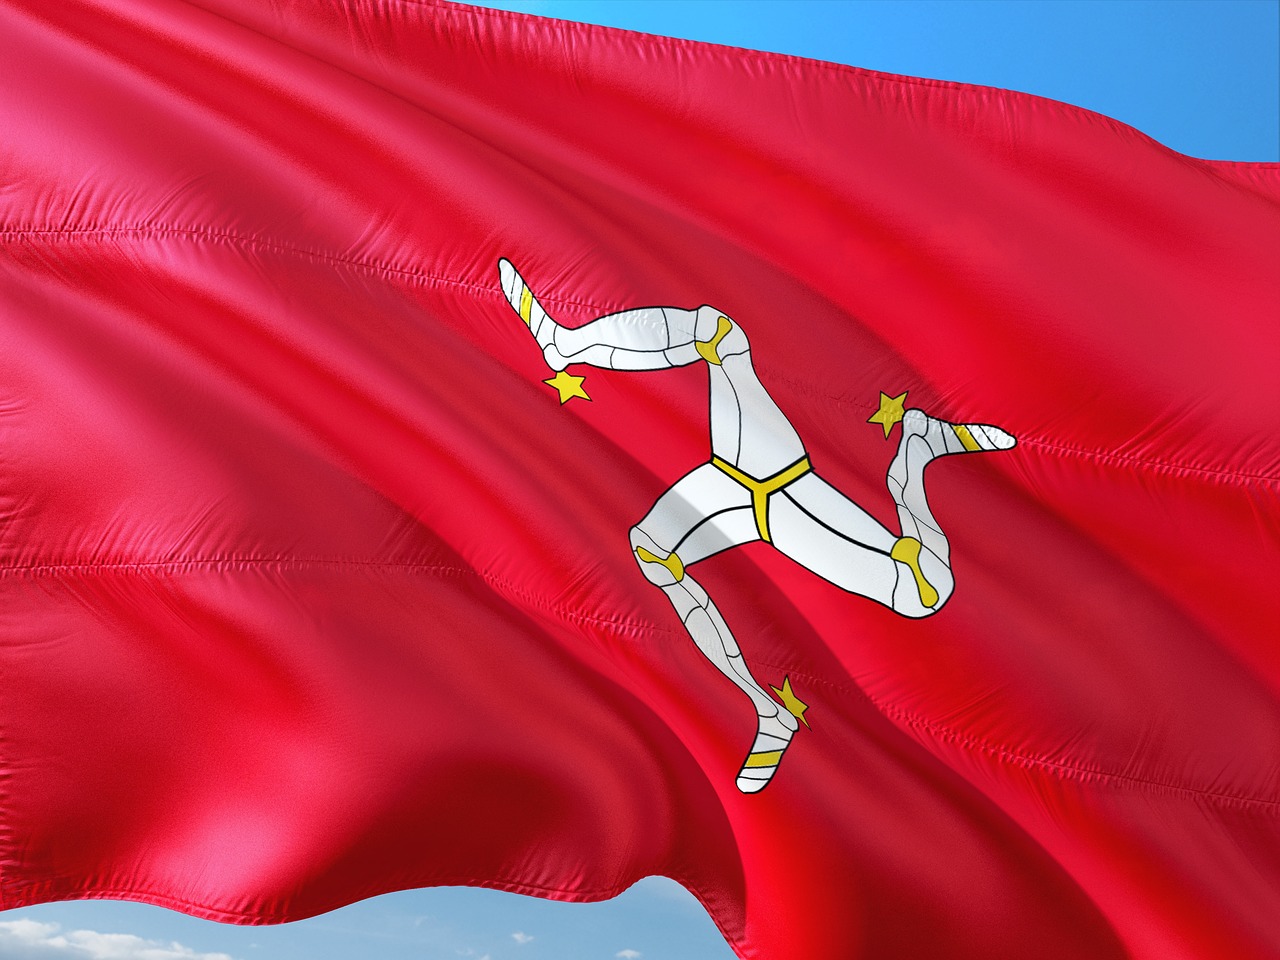 A red Isle of Man flag with three white legs against a blue sky